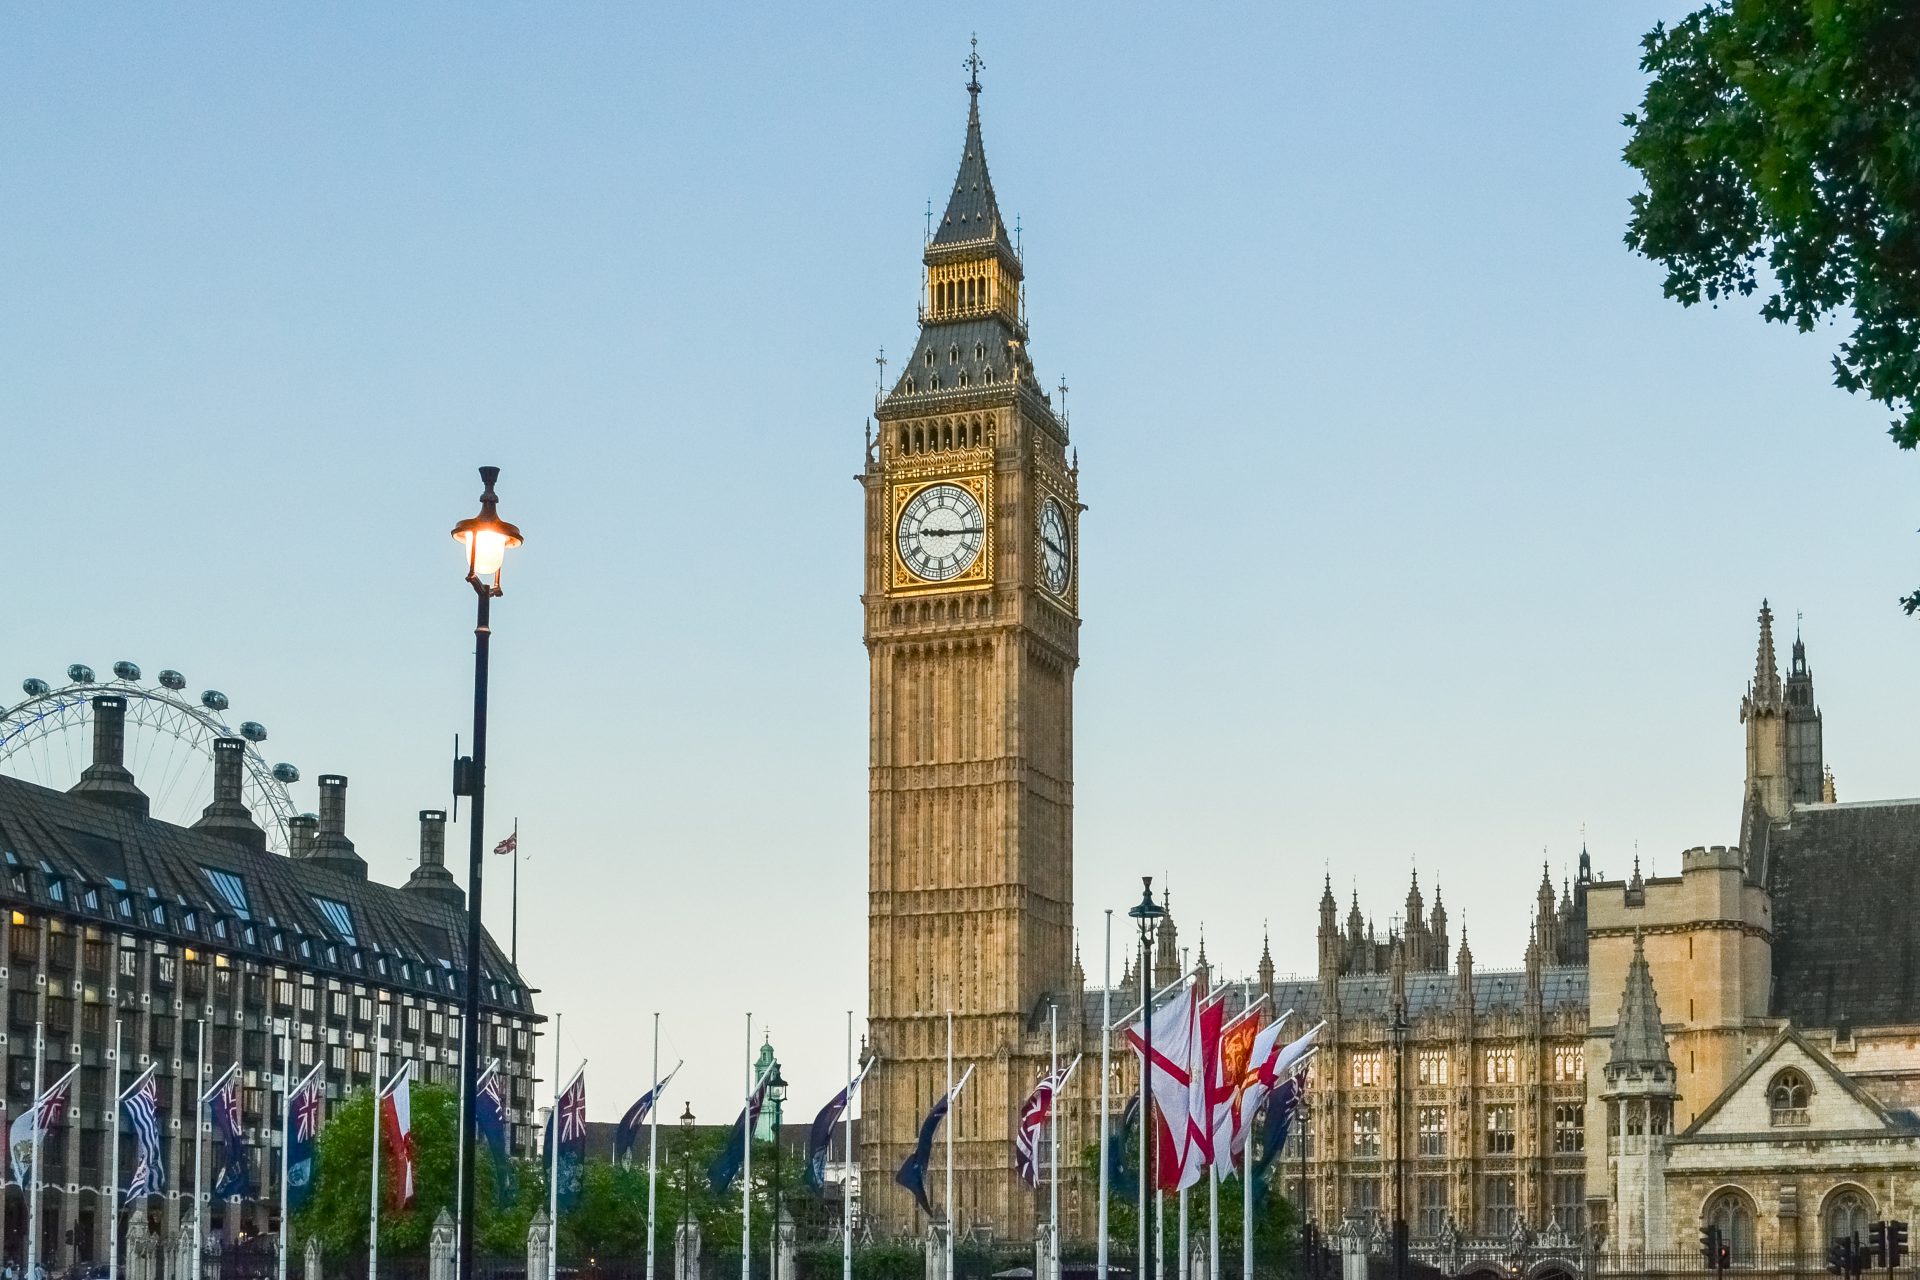 <p>Find out the details about the new fee that you will have to pay (and pass an evaluation) to be able to enter the United Kingdom.</p> <p><a href="https://www.msn.com/en-us/channel/source/Showbizz%20Daily%20English/sr-vid-w8hcuhvu3f8qr5wn5rk8xhsu5x8irqrgtxcypg4uxvn7tq9vkkfa?cvid=cddbc5c4fc9748a196a59c4cb5f3d12a&ei=7" rel="noopener">Follow Showbizz Daily to stay informed</a></p>